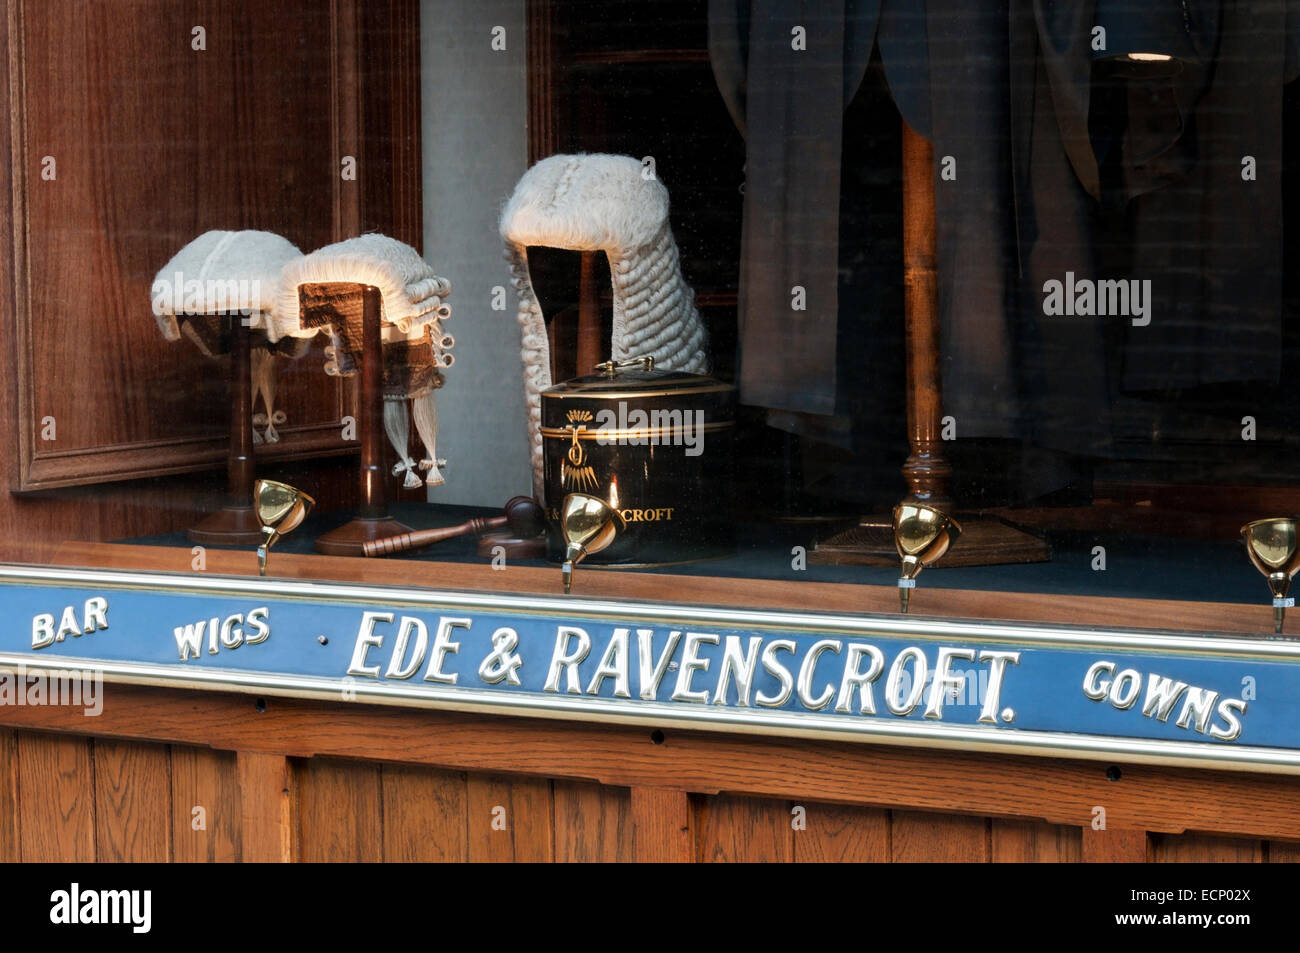 Barristers' wigs in the window of Ede & Ravenscroft, London. Stock Photo